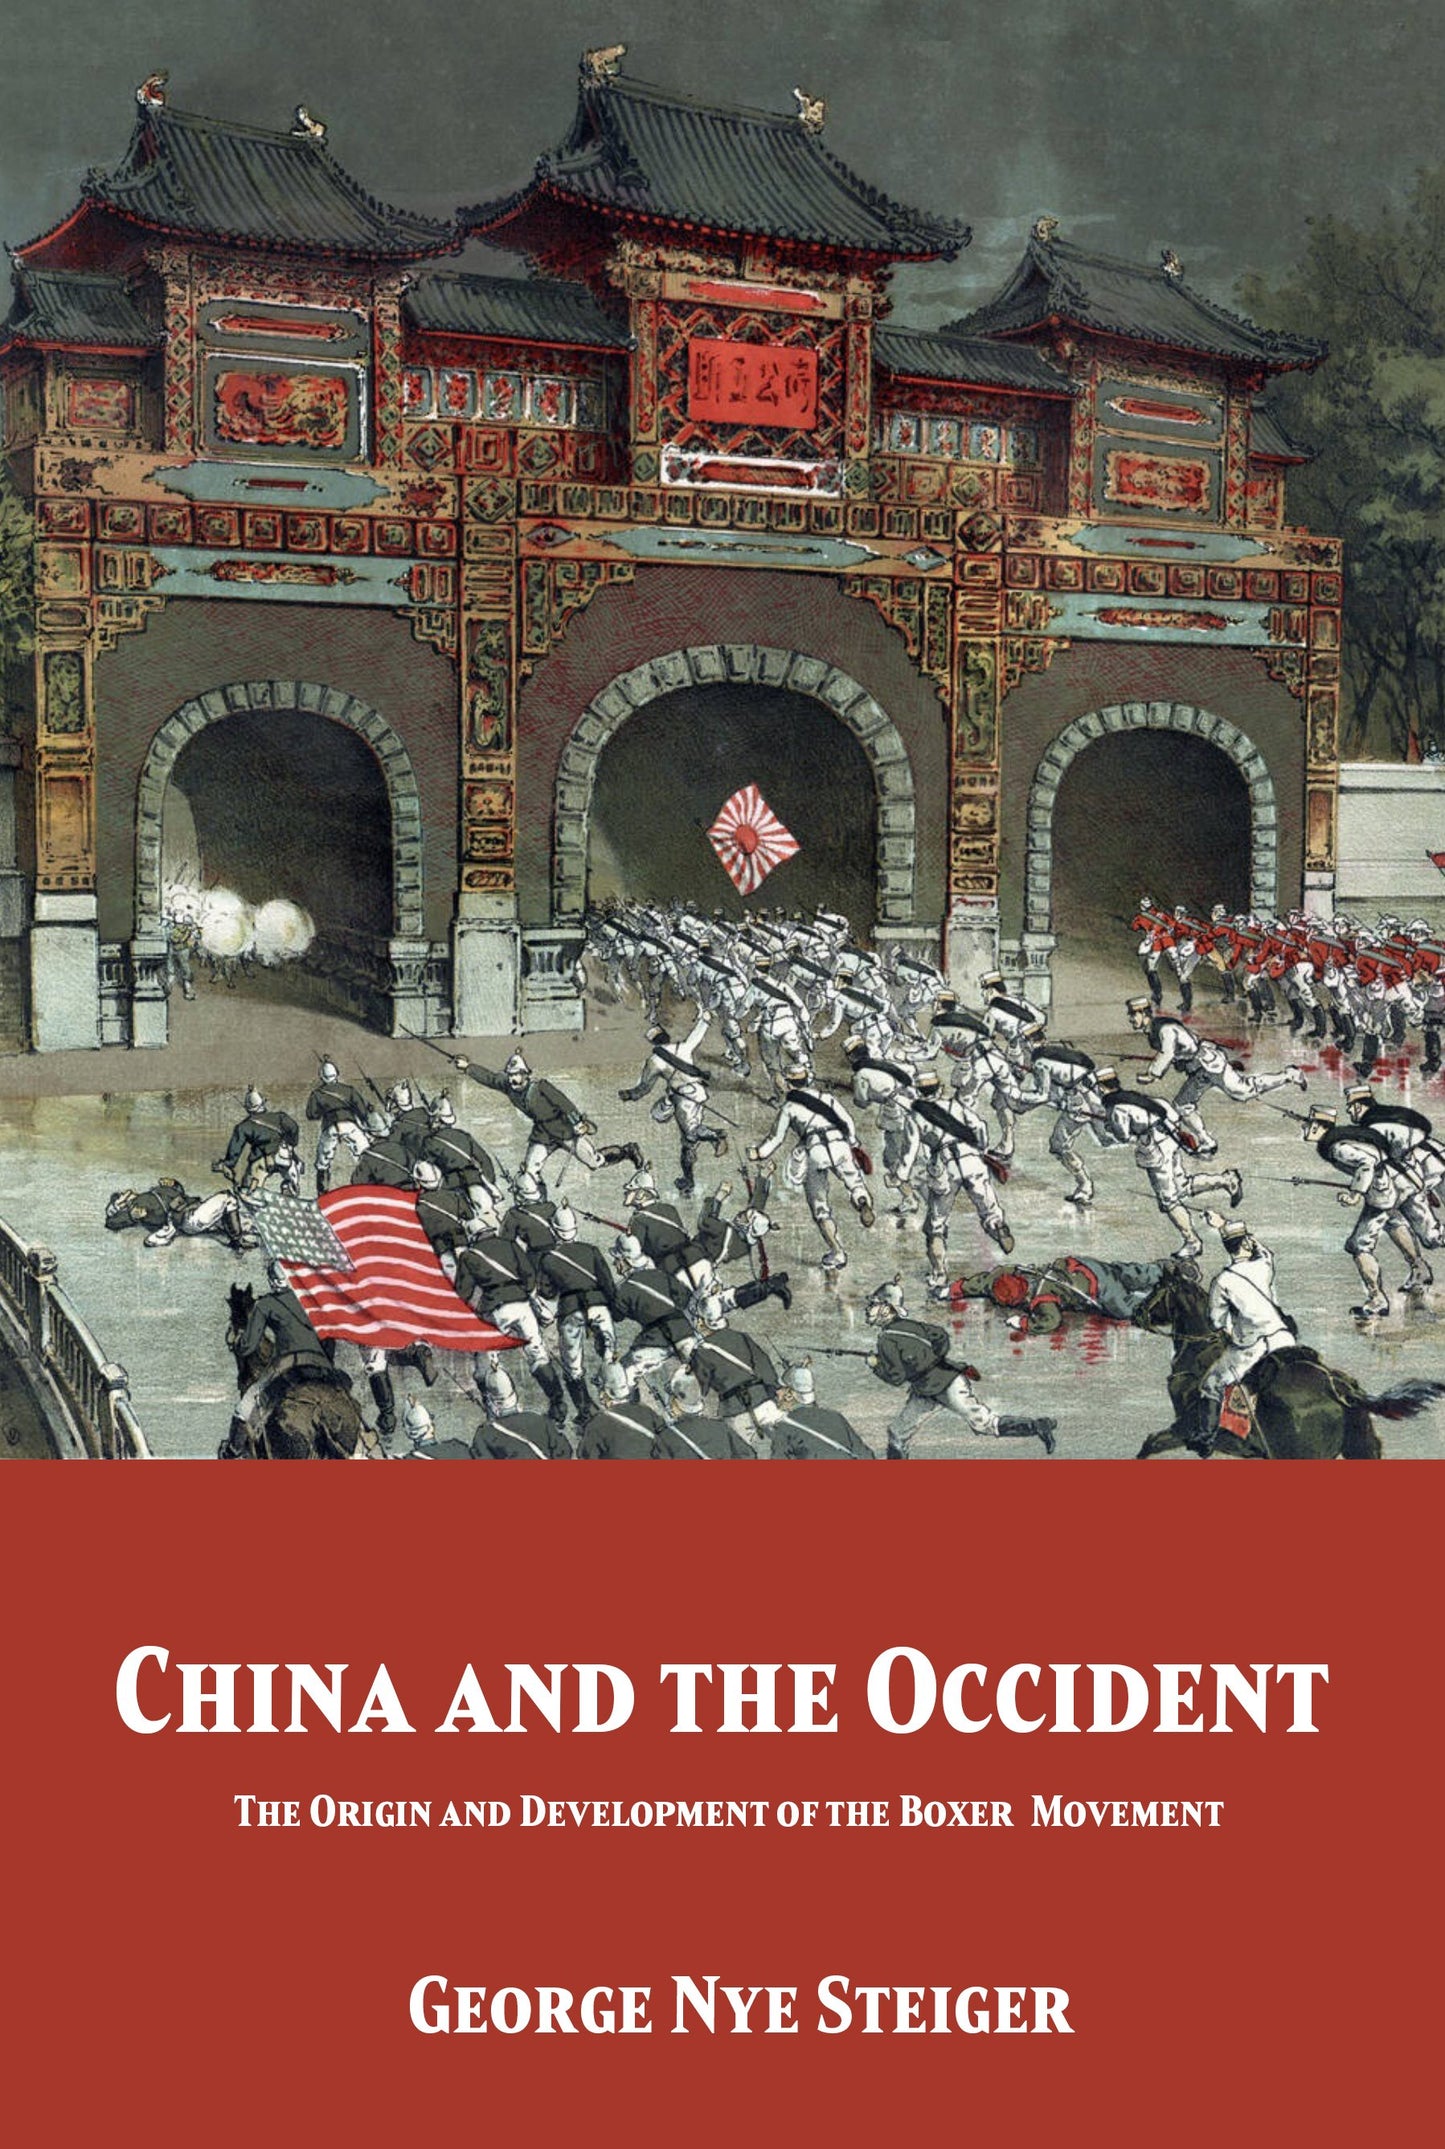 China and the Occident